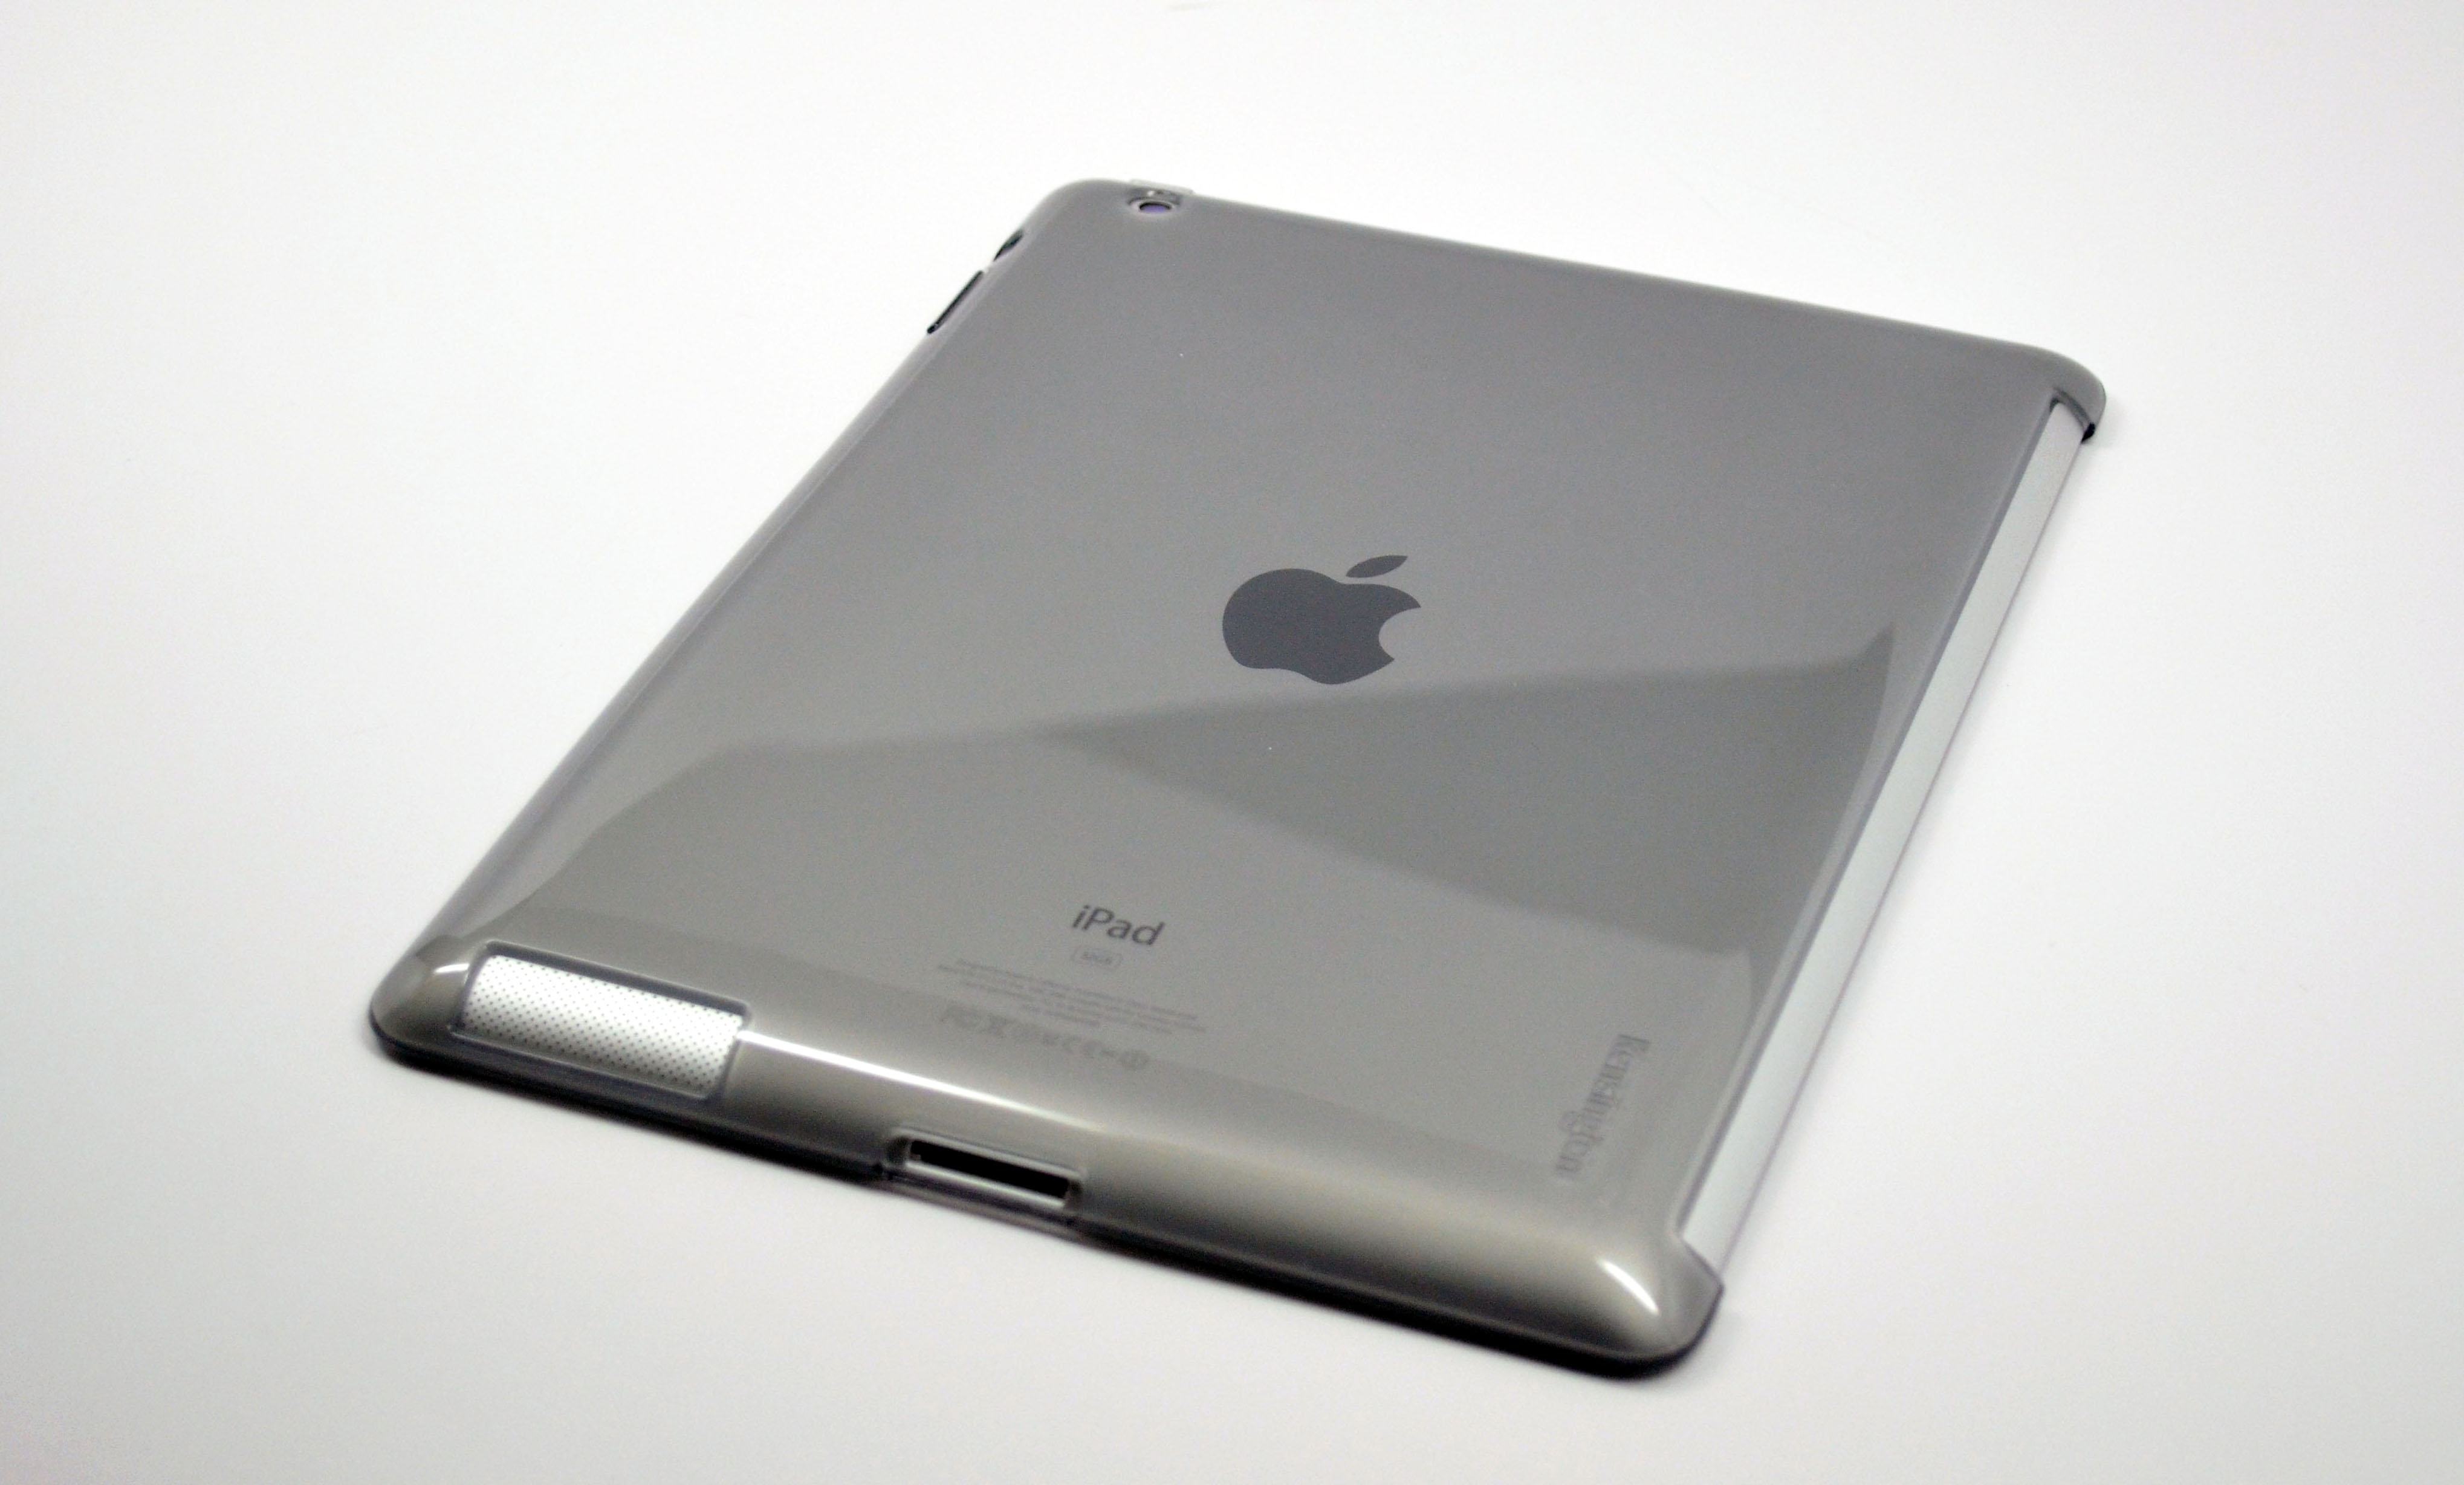 Find out what users say about the iPad 2 iOS 8.1.1 update.